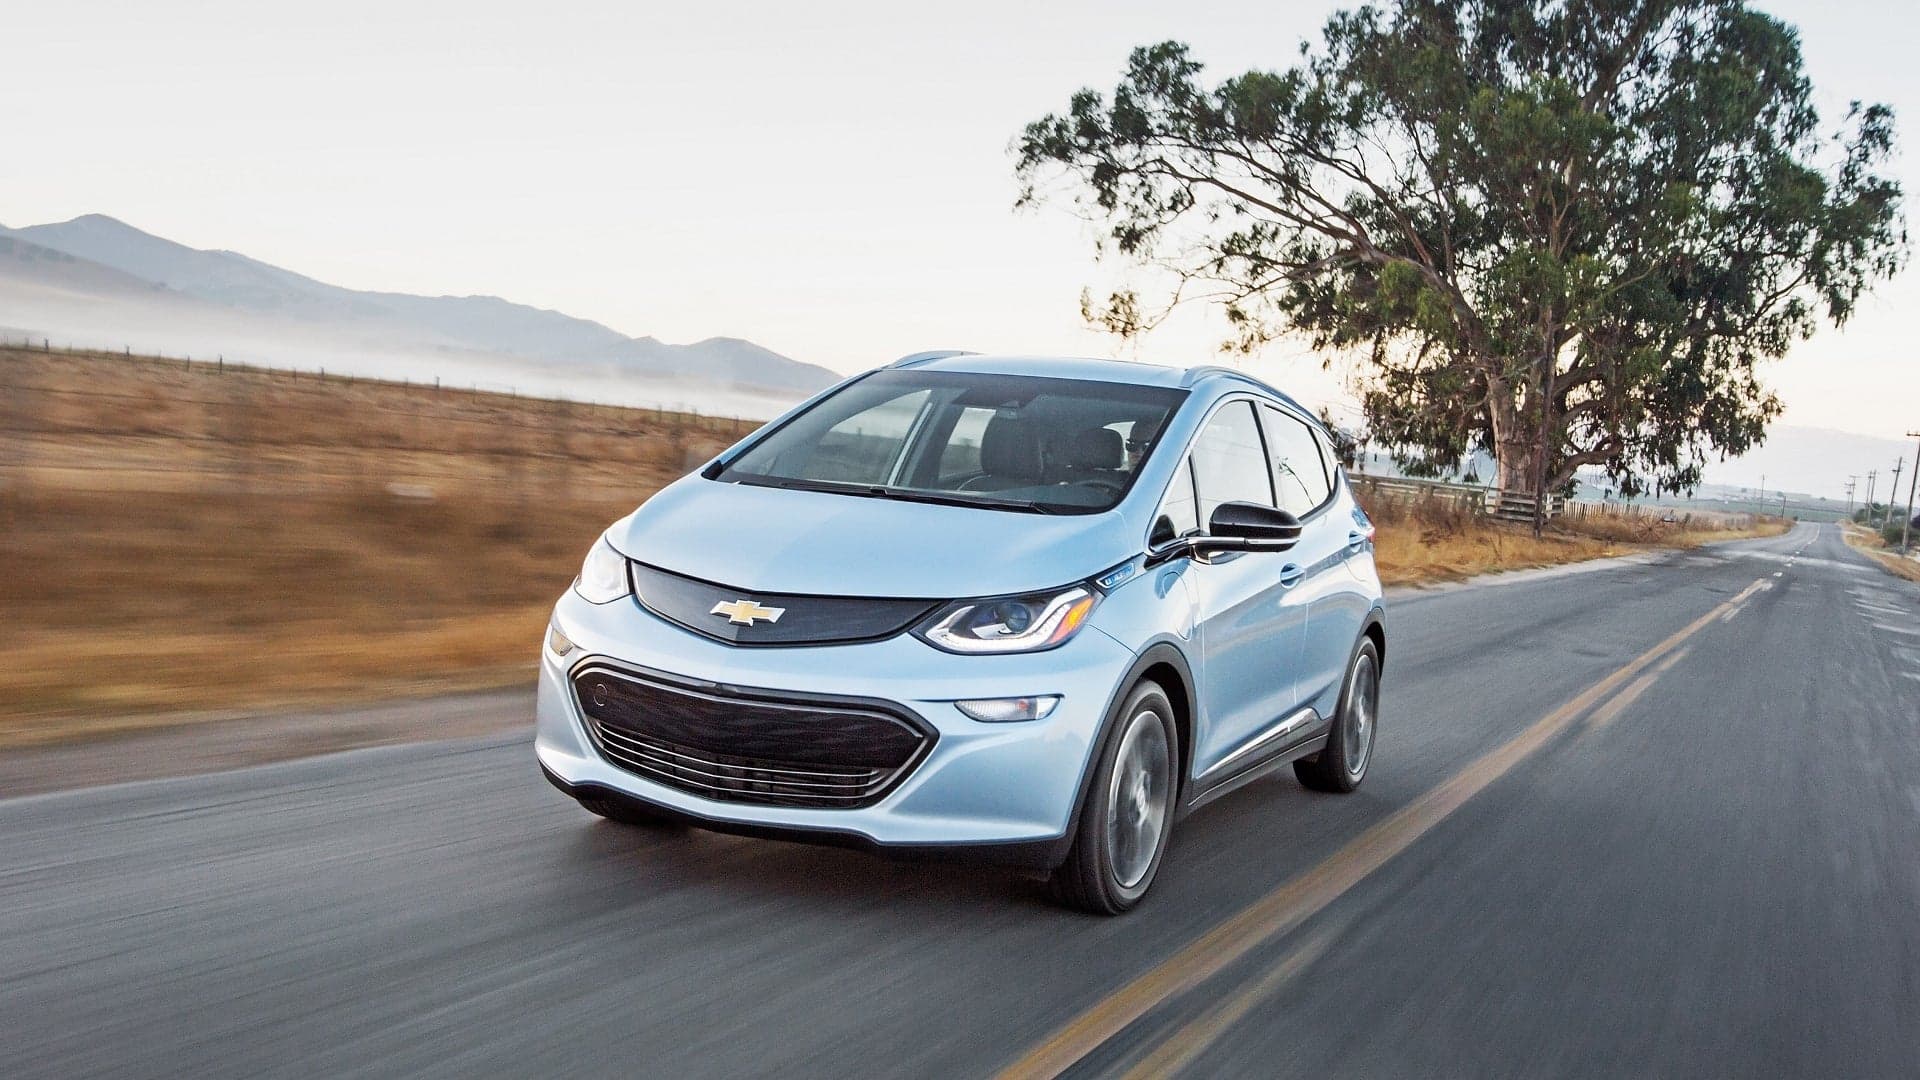 Chevy Bolt Will Finally Hit Dealerships Across America in August